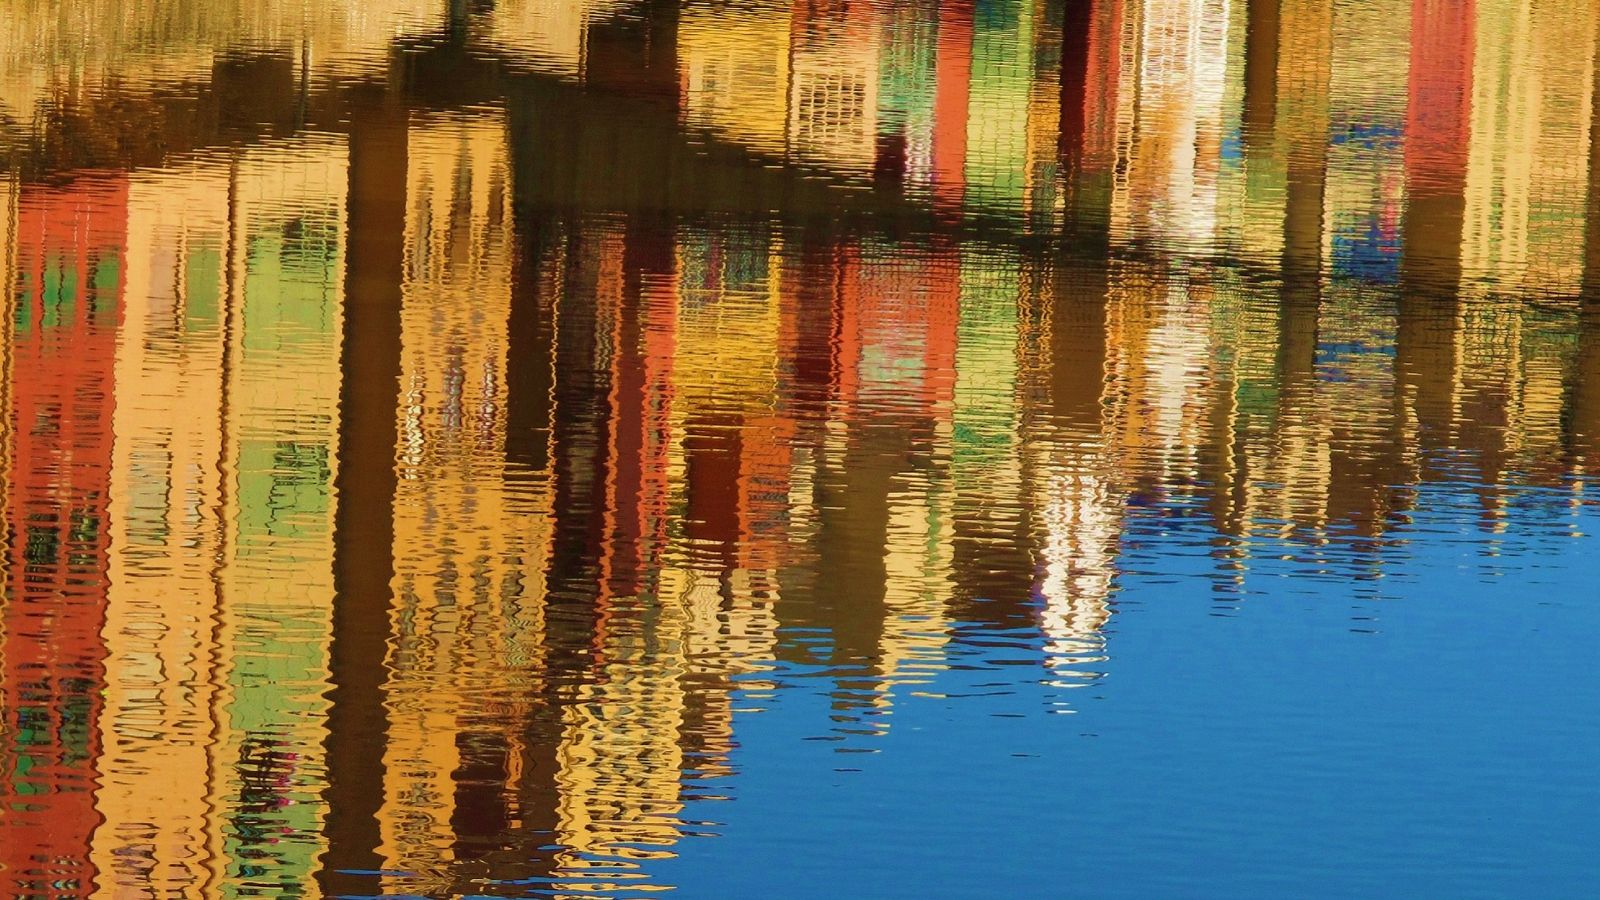 A reflection of buildings in the water.